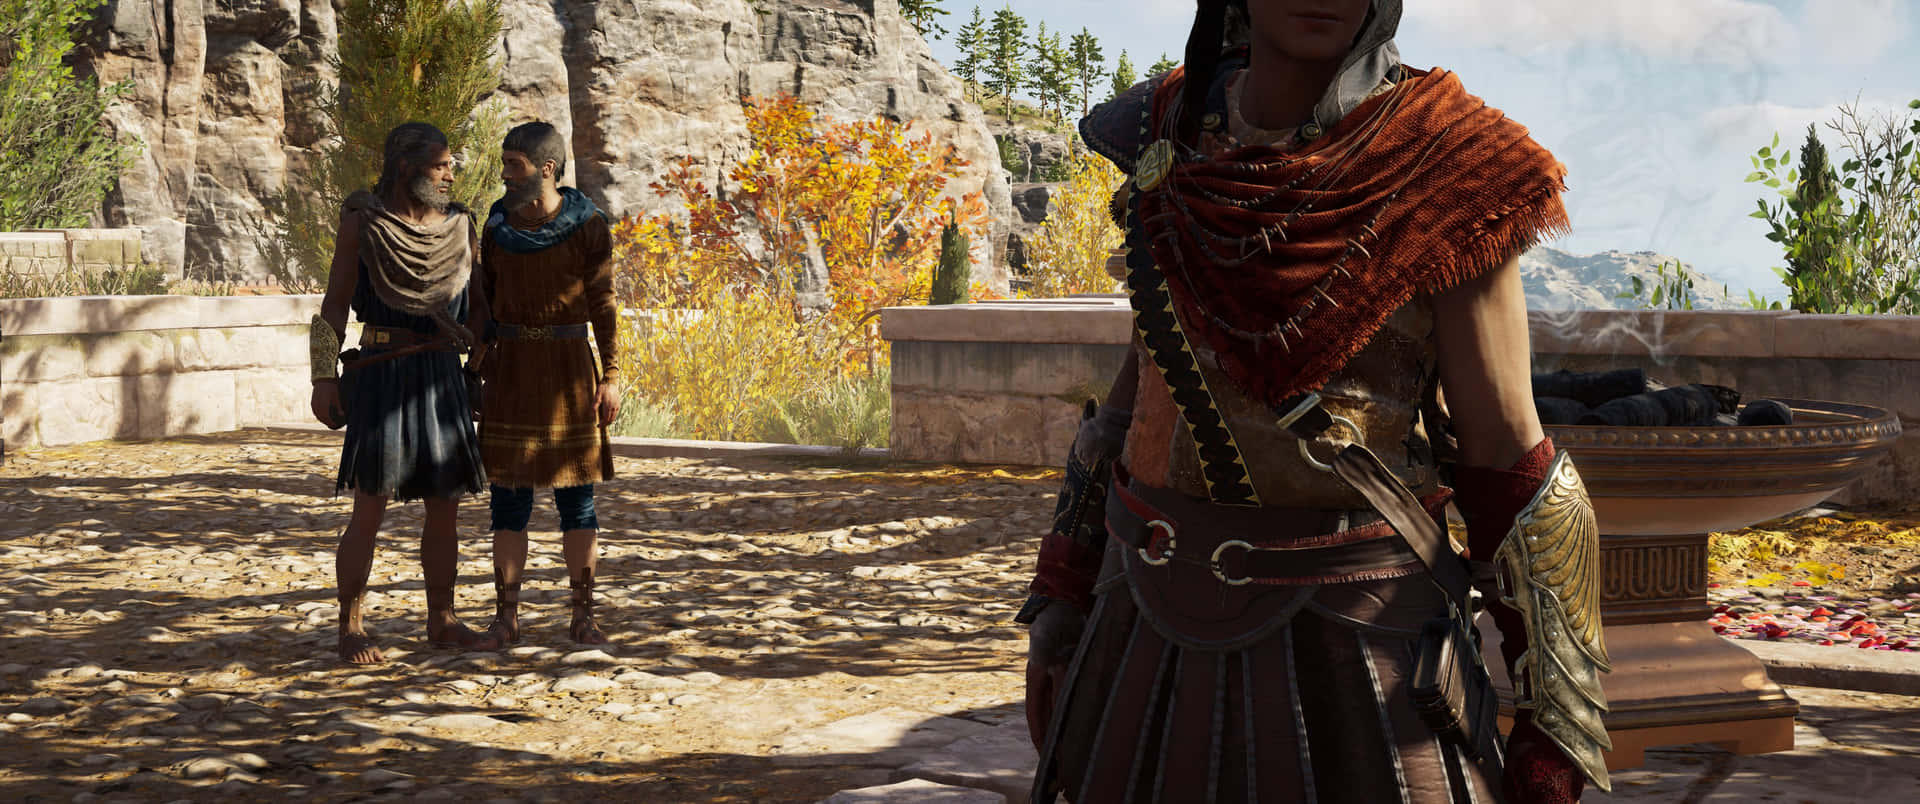 3440x1440p Assassin's Creed Odyssey Background People Gossiping Background